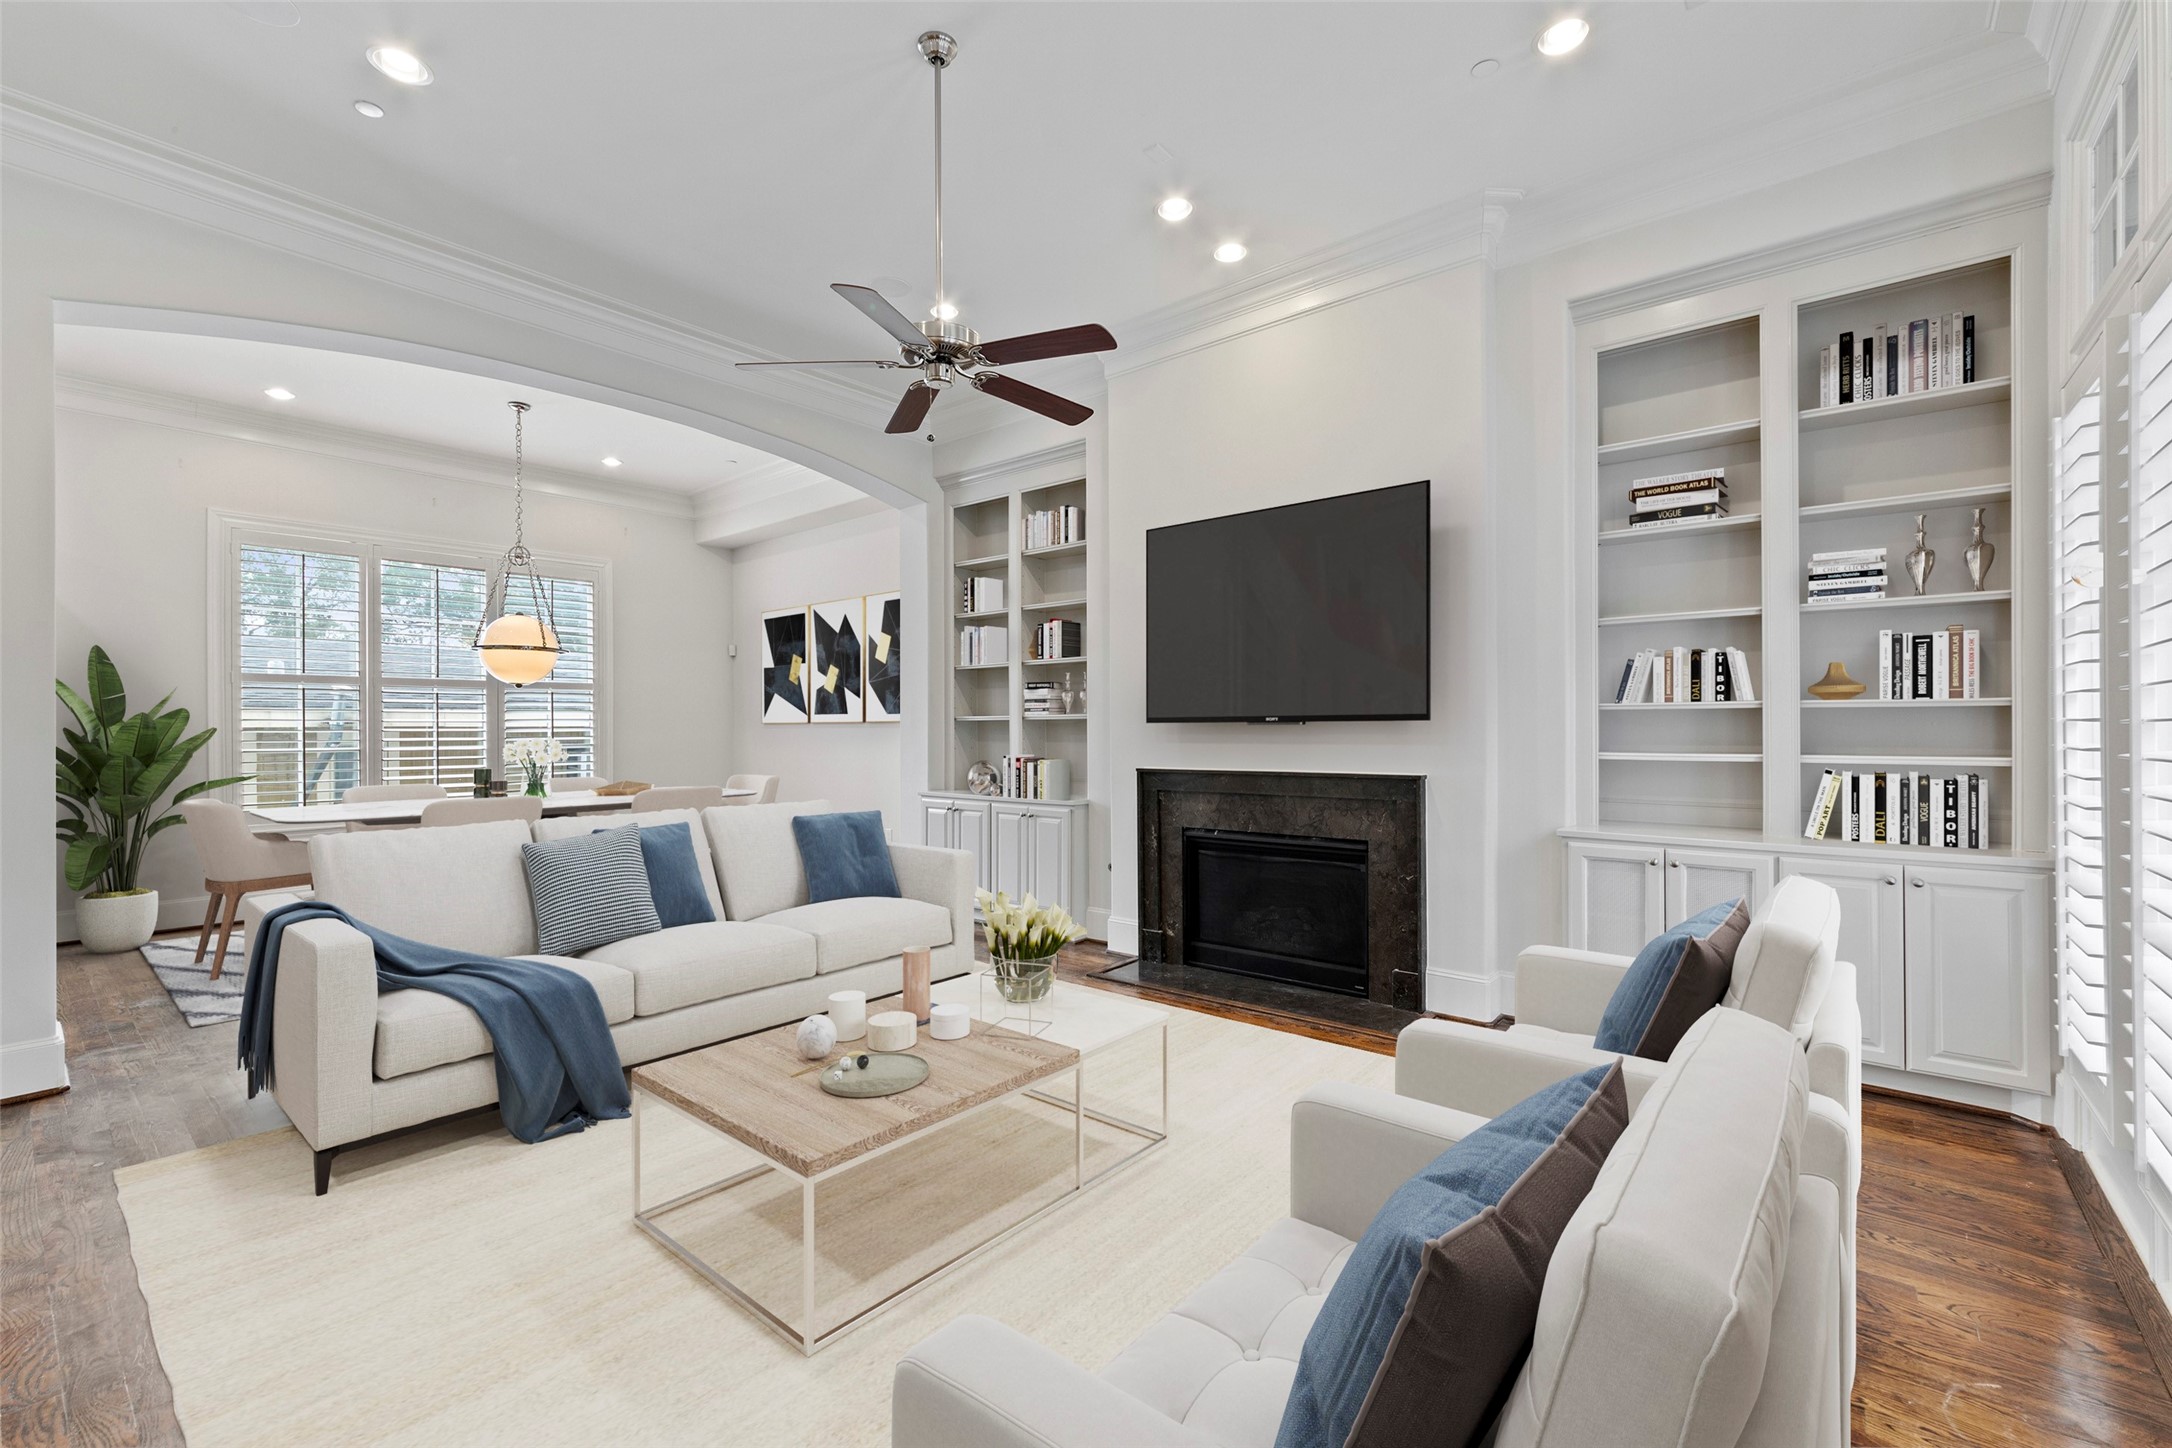 With a sneak peek inside before touring the garden entry, you'll find this four story corner townhome has an abundance of natural light, high ceilings and attention to detail everywhere.